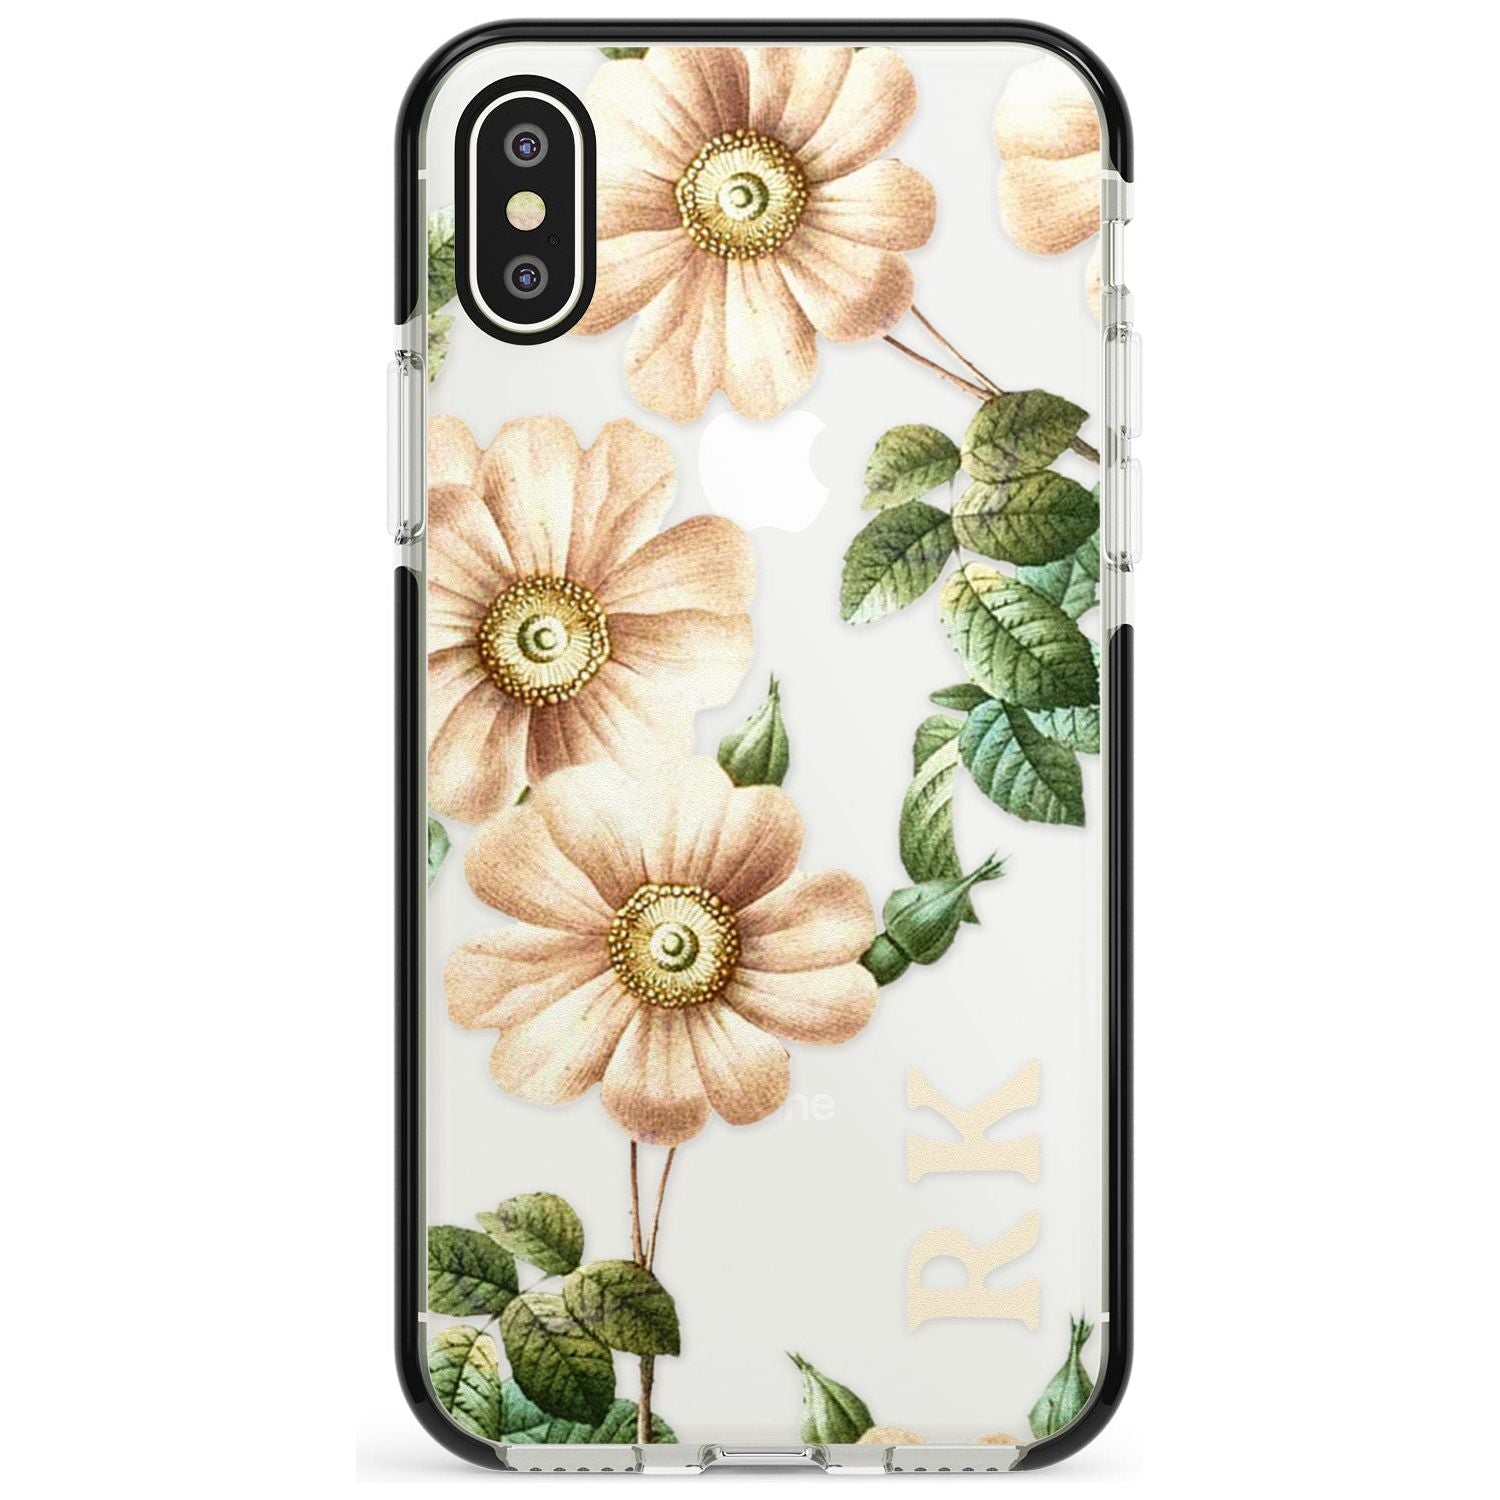 Custom Clear Vintage Floral Cream Anemones Black Impact Phone Case for iPhone X XS Max XR